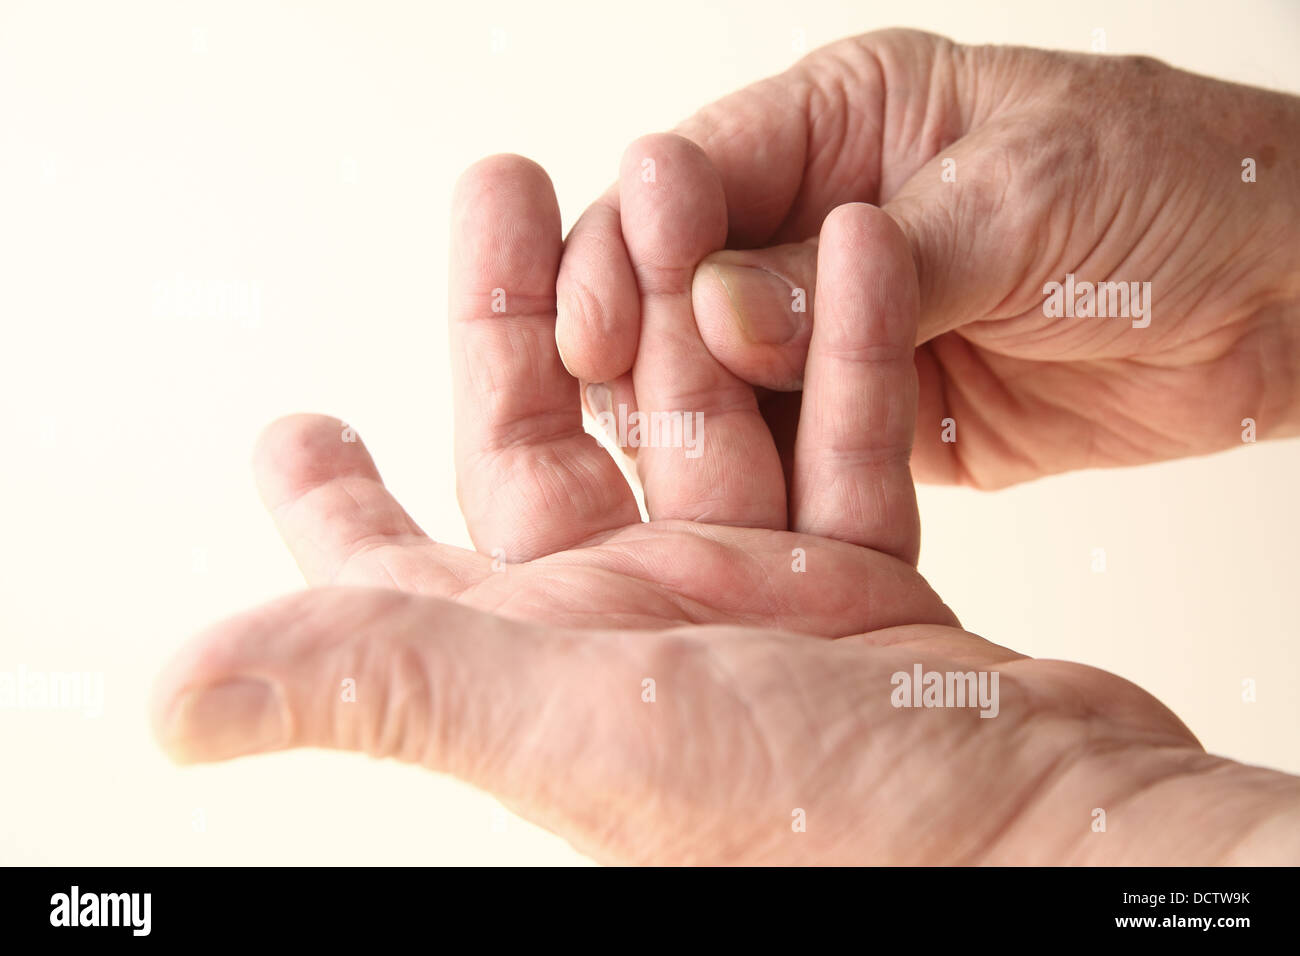 senior man with stiffness or numbness in his finger Stock Photo